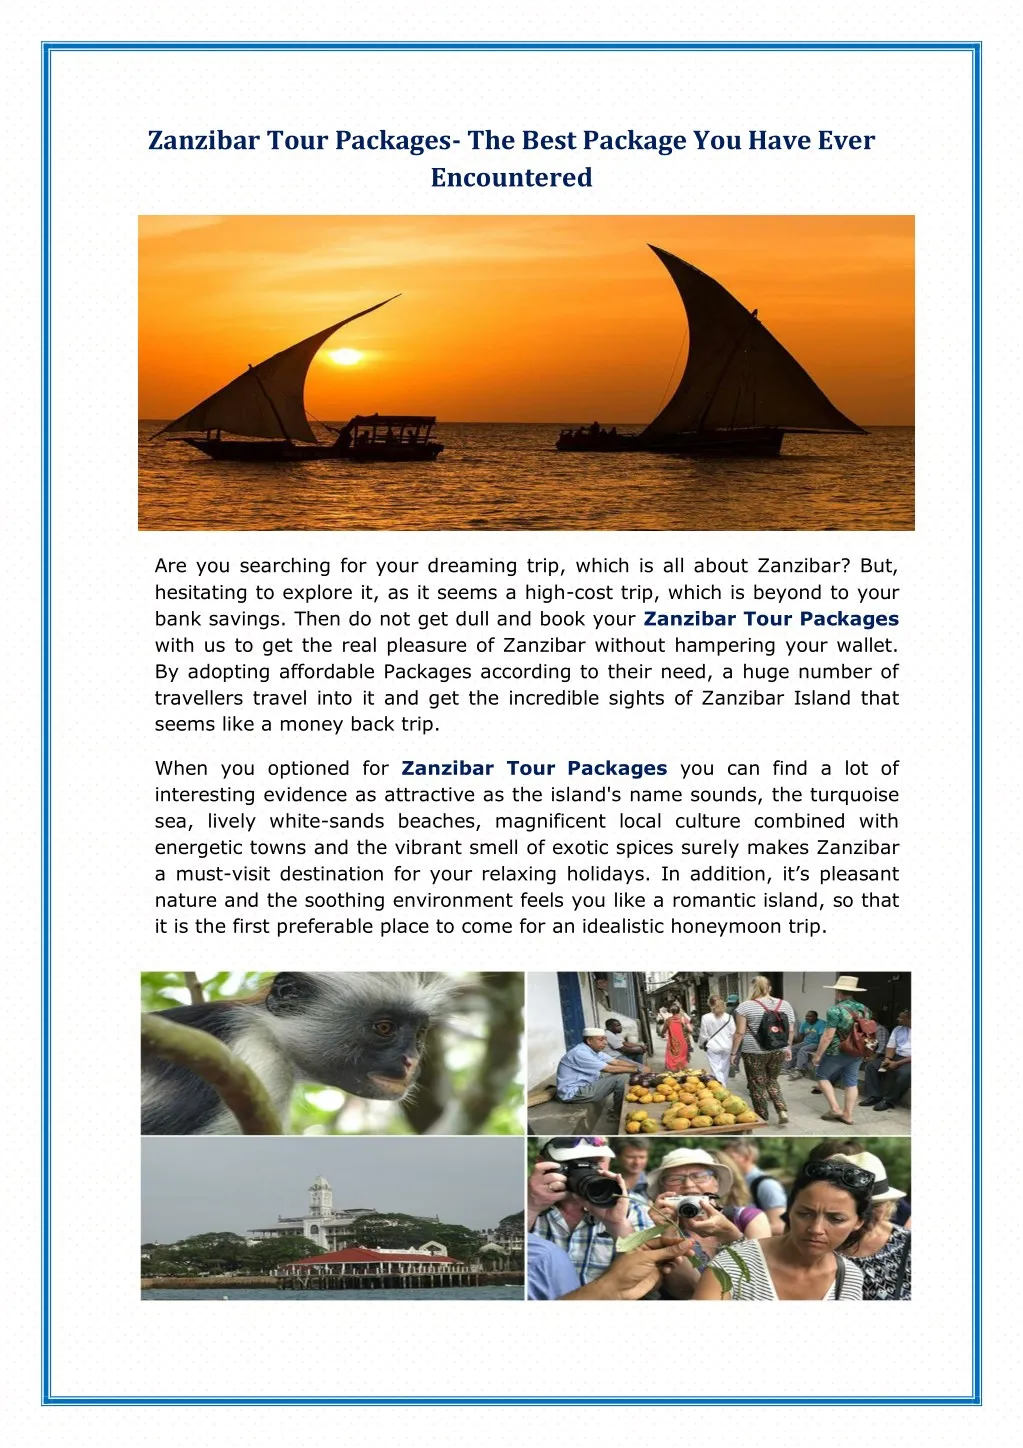 zanzibar tour packages the best package you have